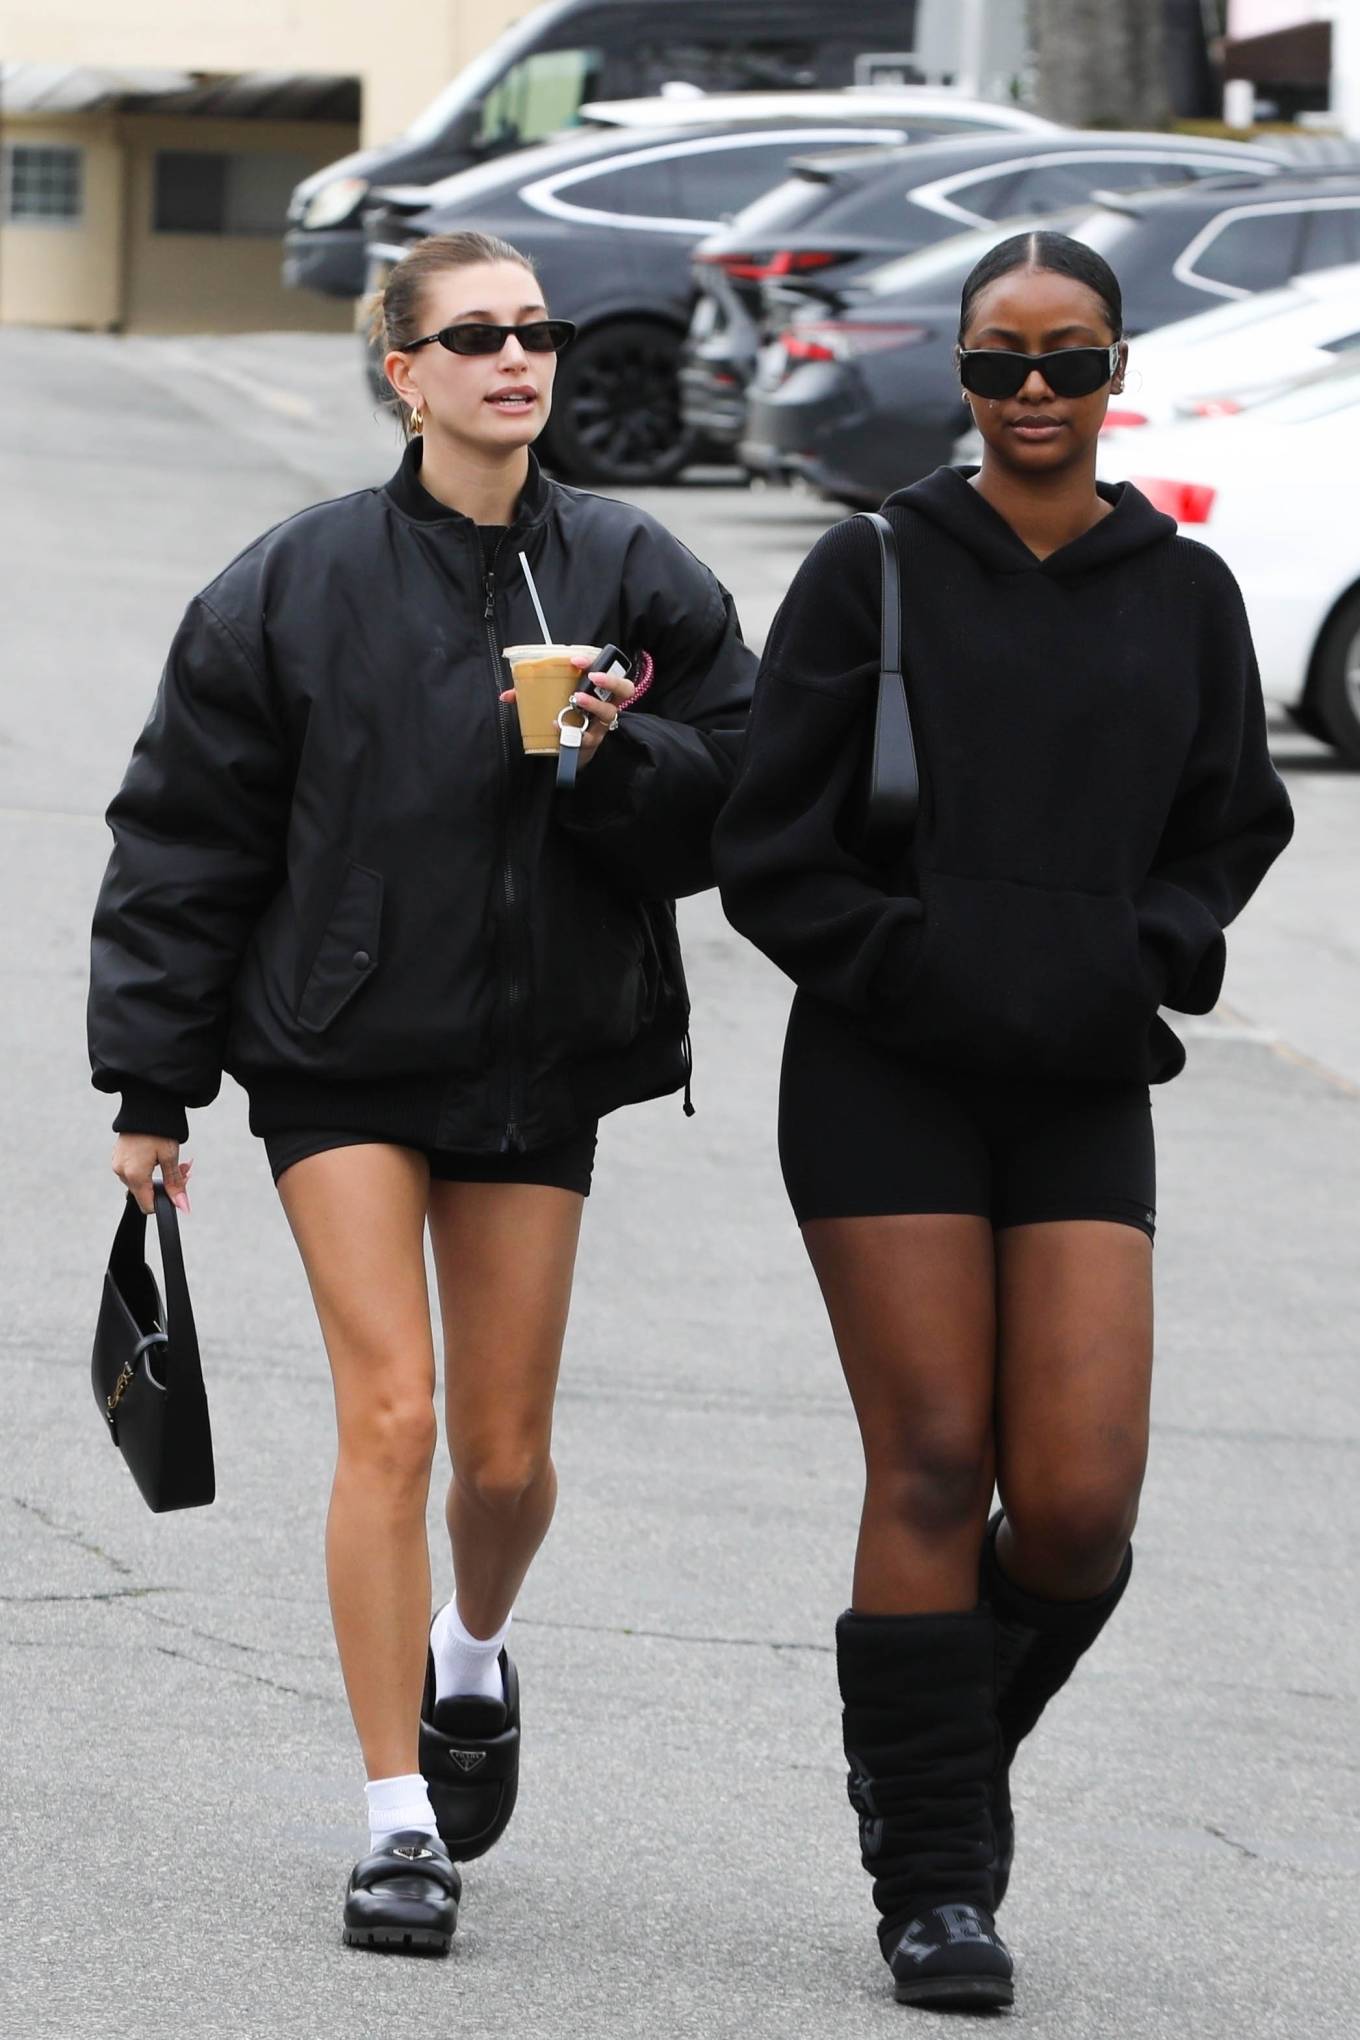 Hailey Bieber - With Justine Skye seen after workout in West Hollywood